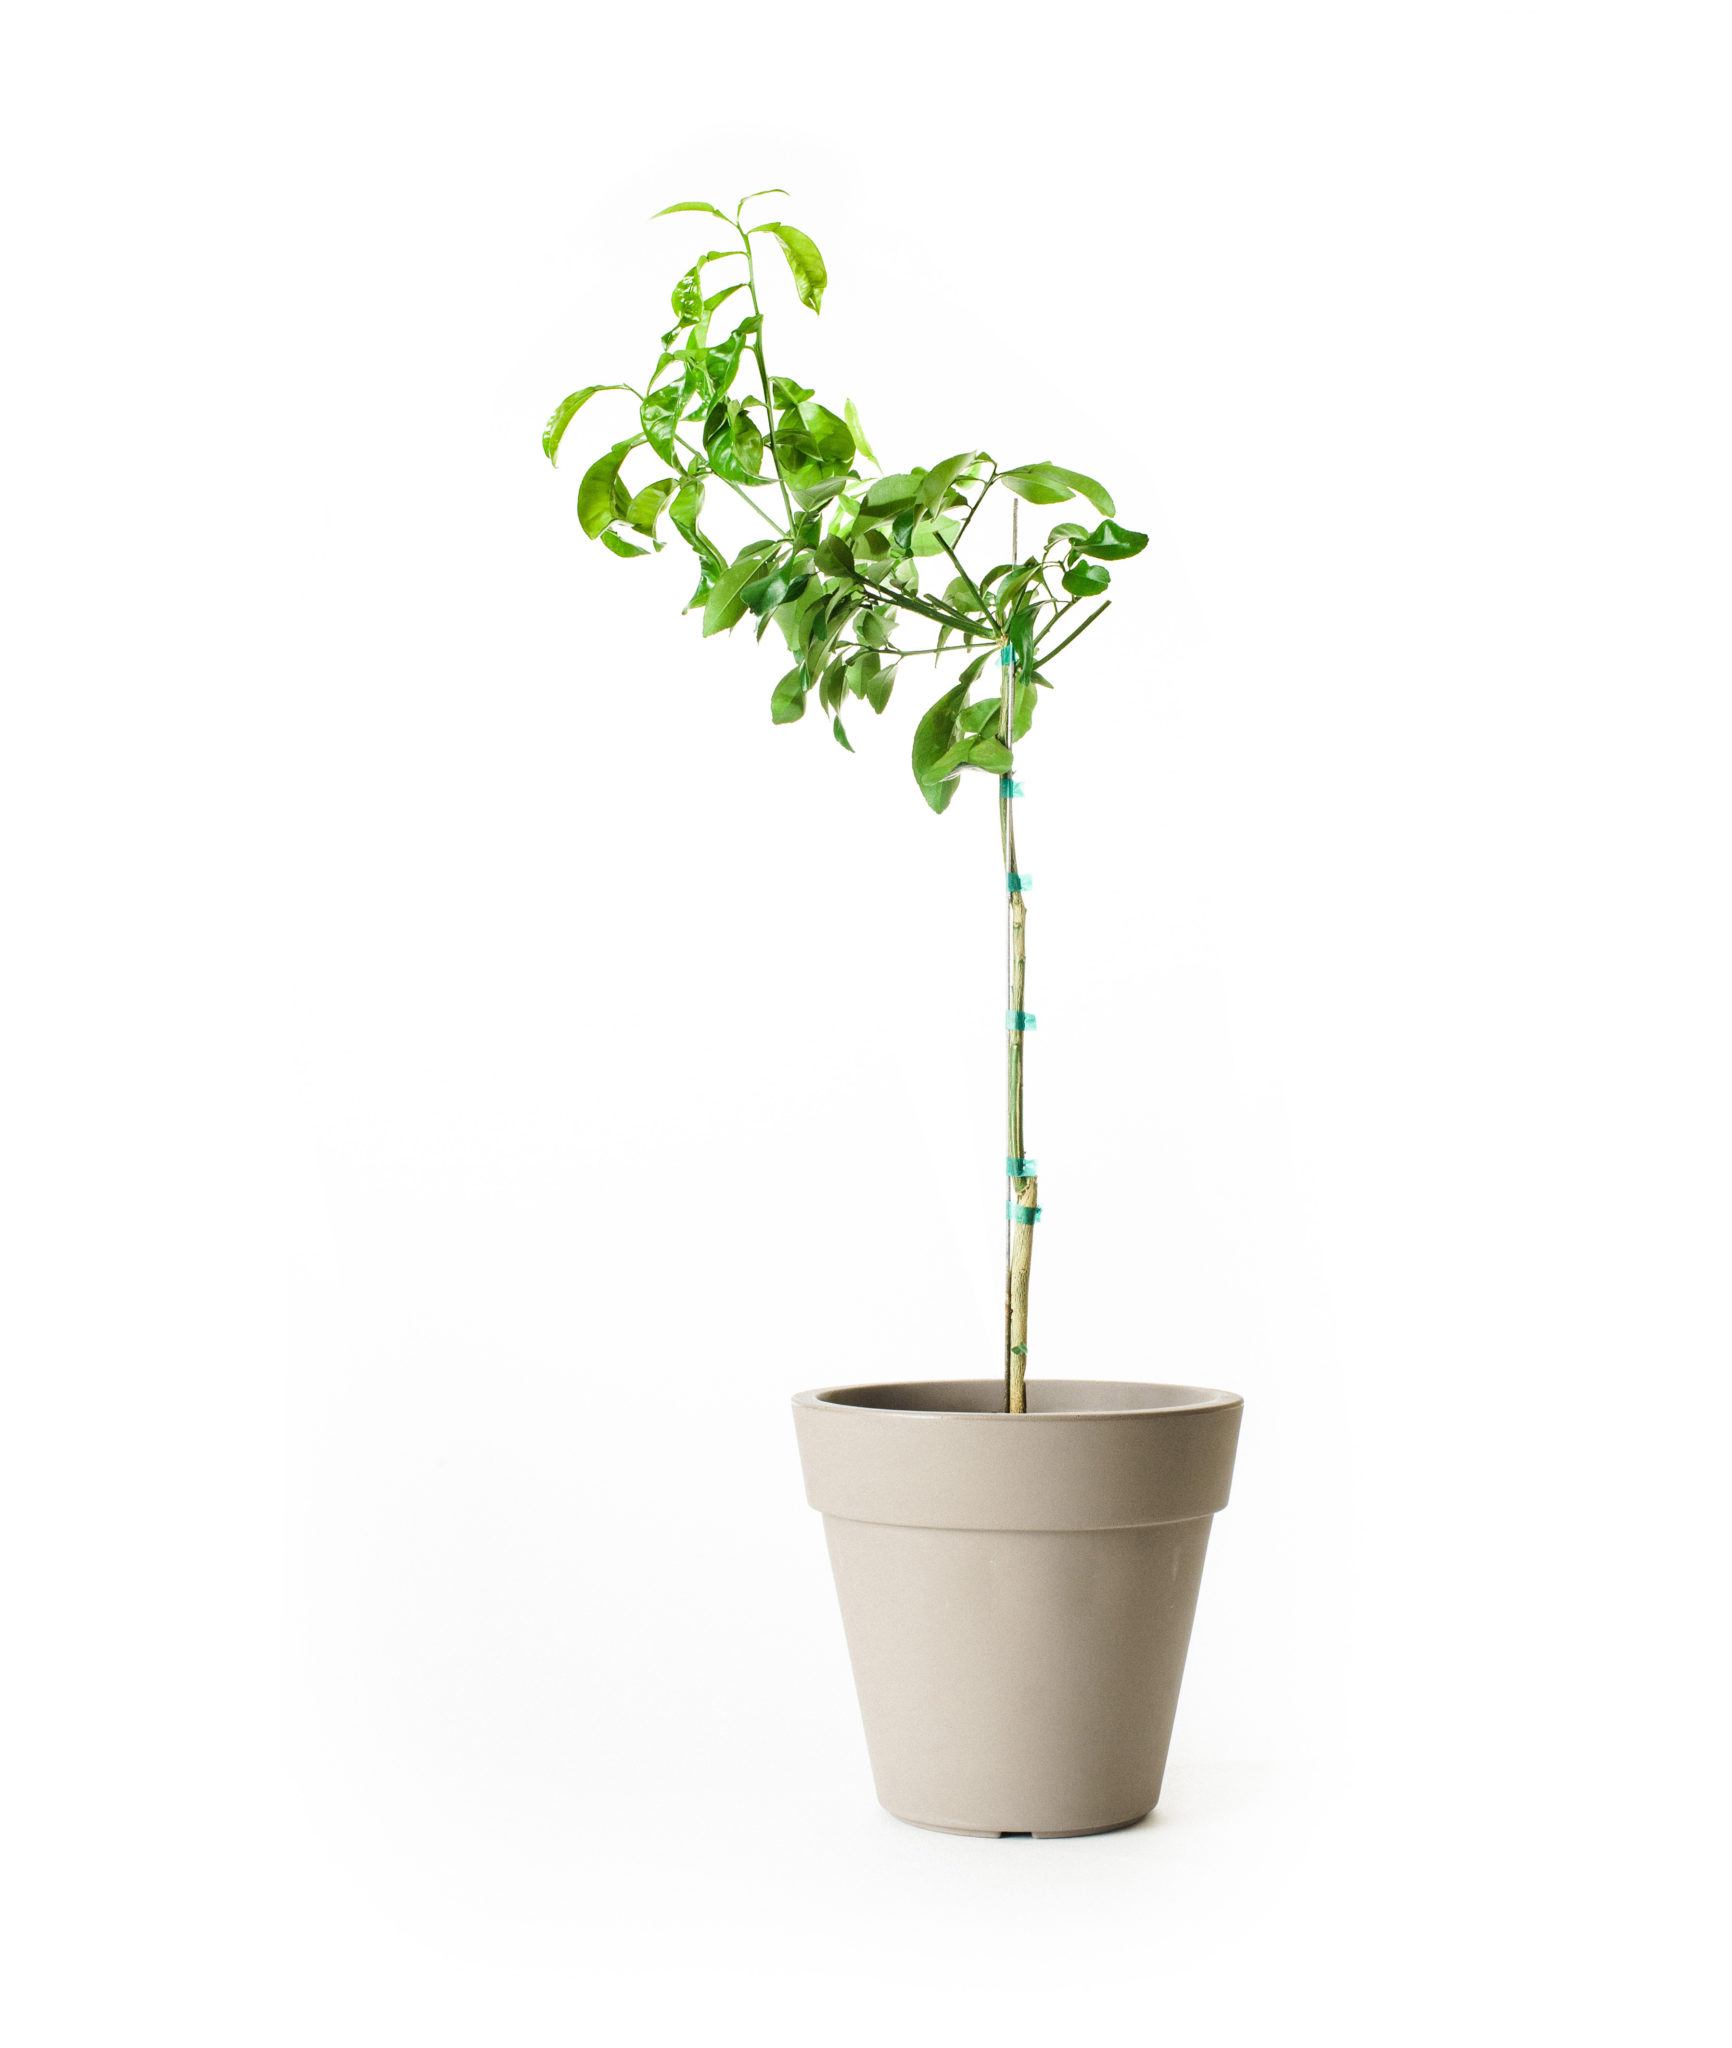 Image of Ruby Red Grapefruit Tree (Age: 2 - 3 Years Height: 2 - 3 FT)